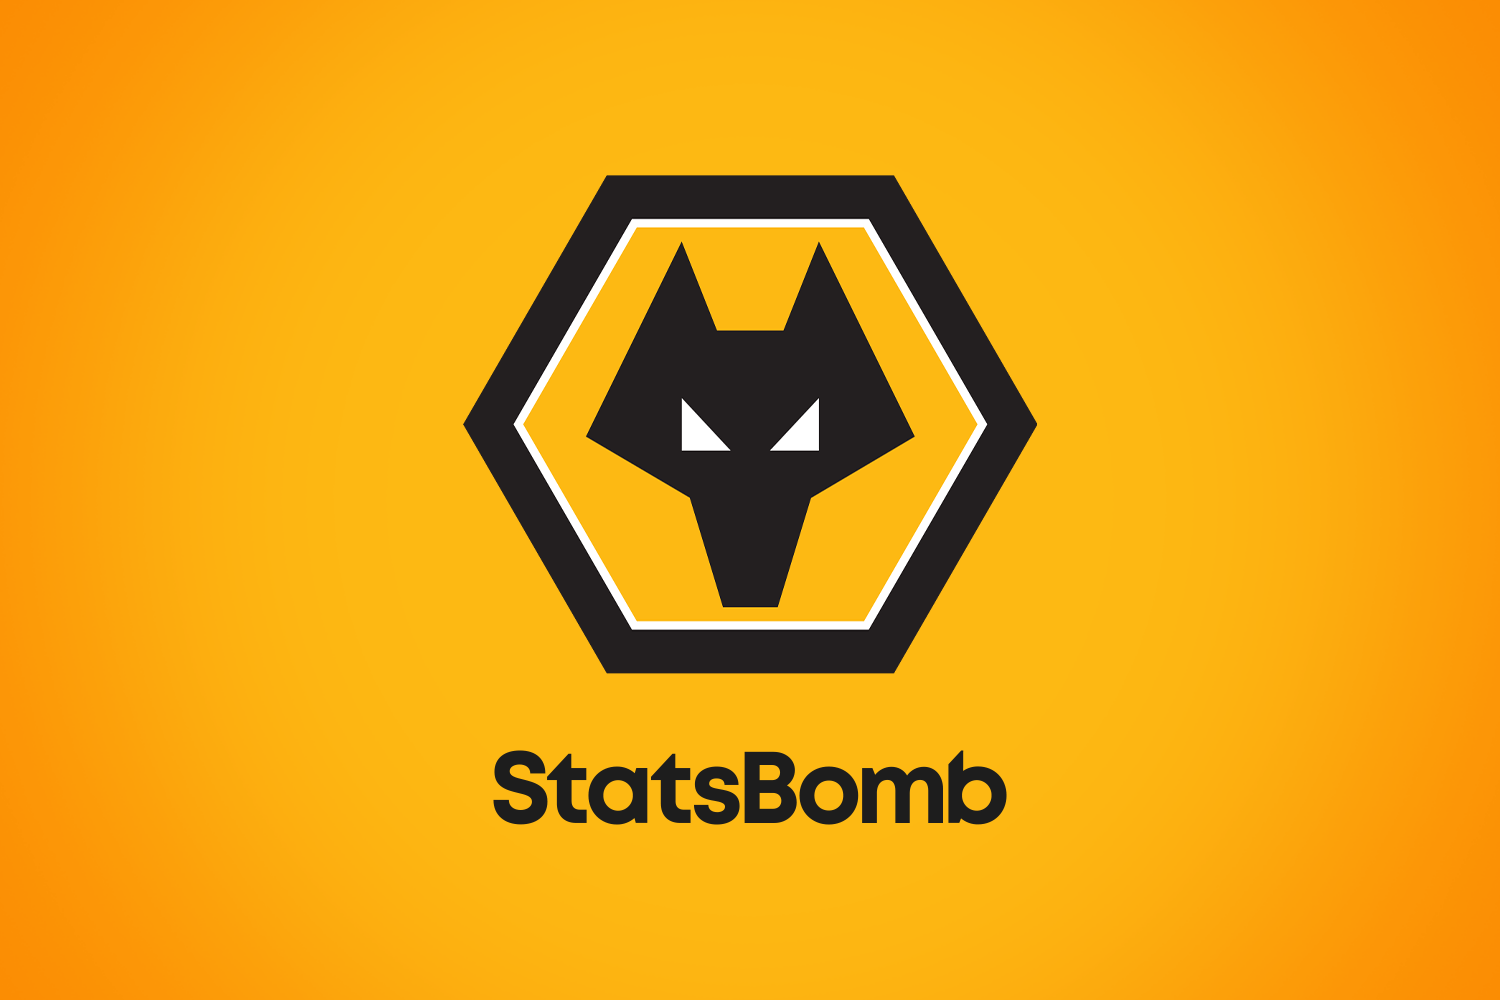 Wolverhampton Wanderers FC Become The Latest Premier League Club To Sign Up For StatsBomb’s 360 and Live Data Products